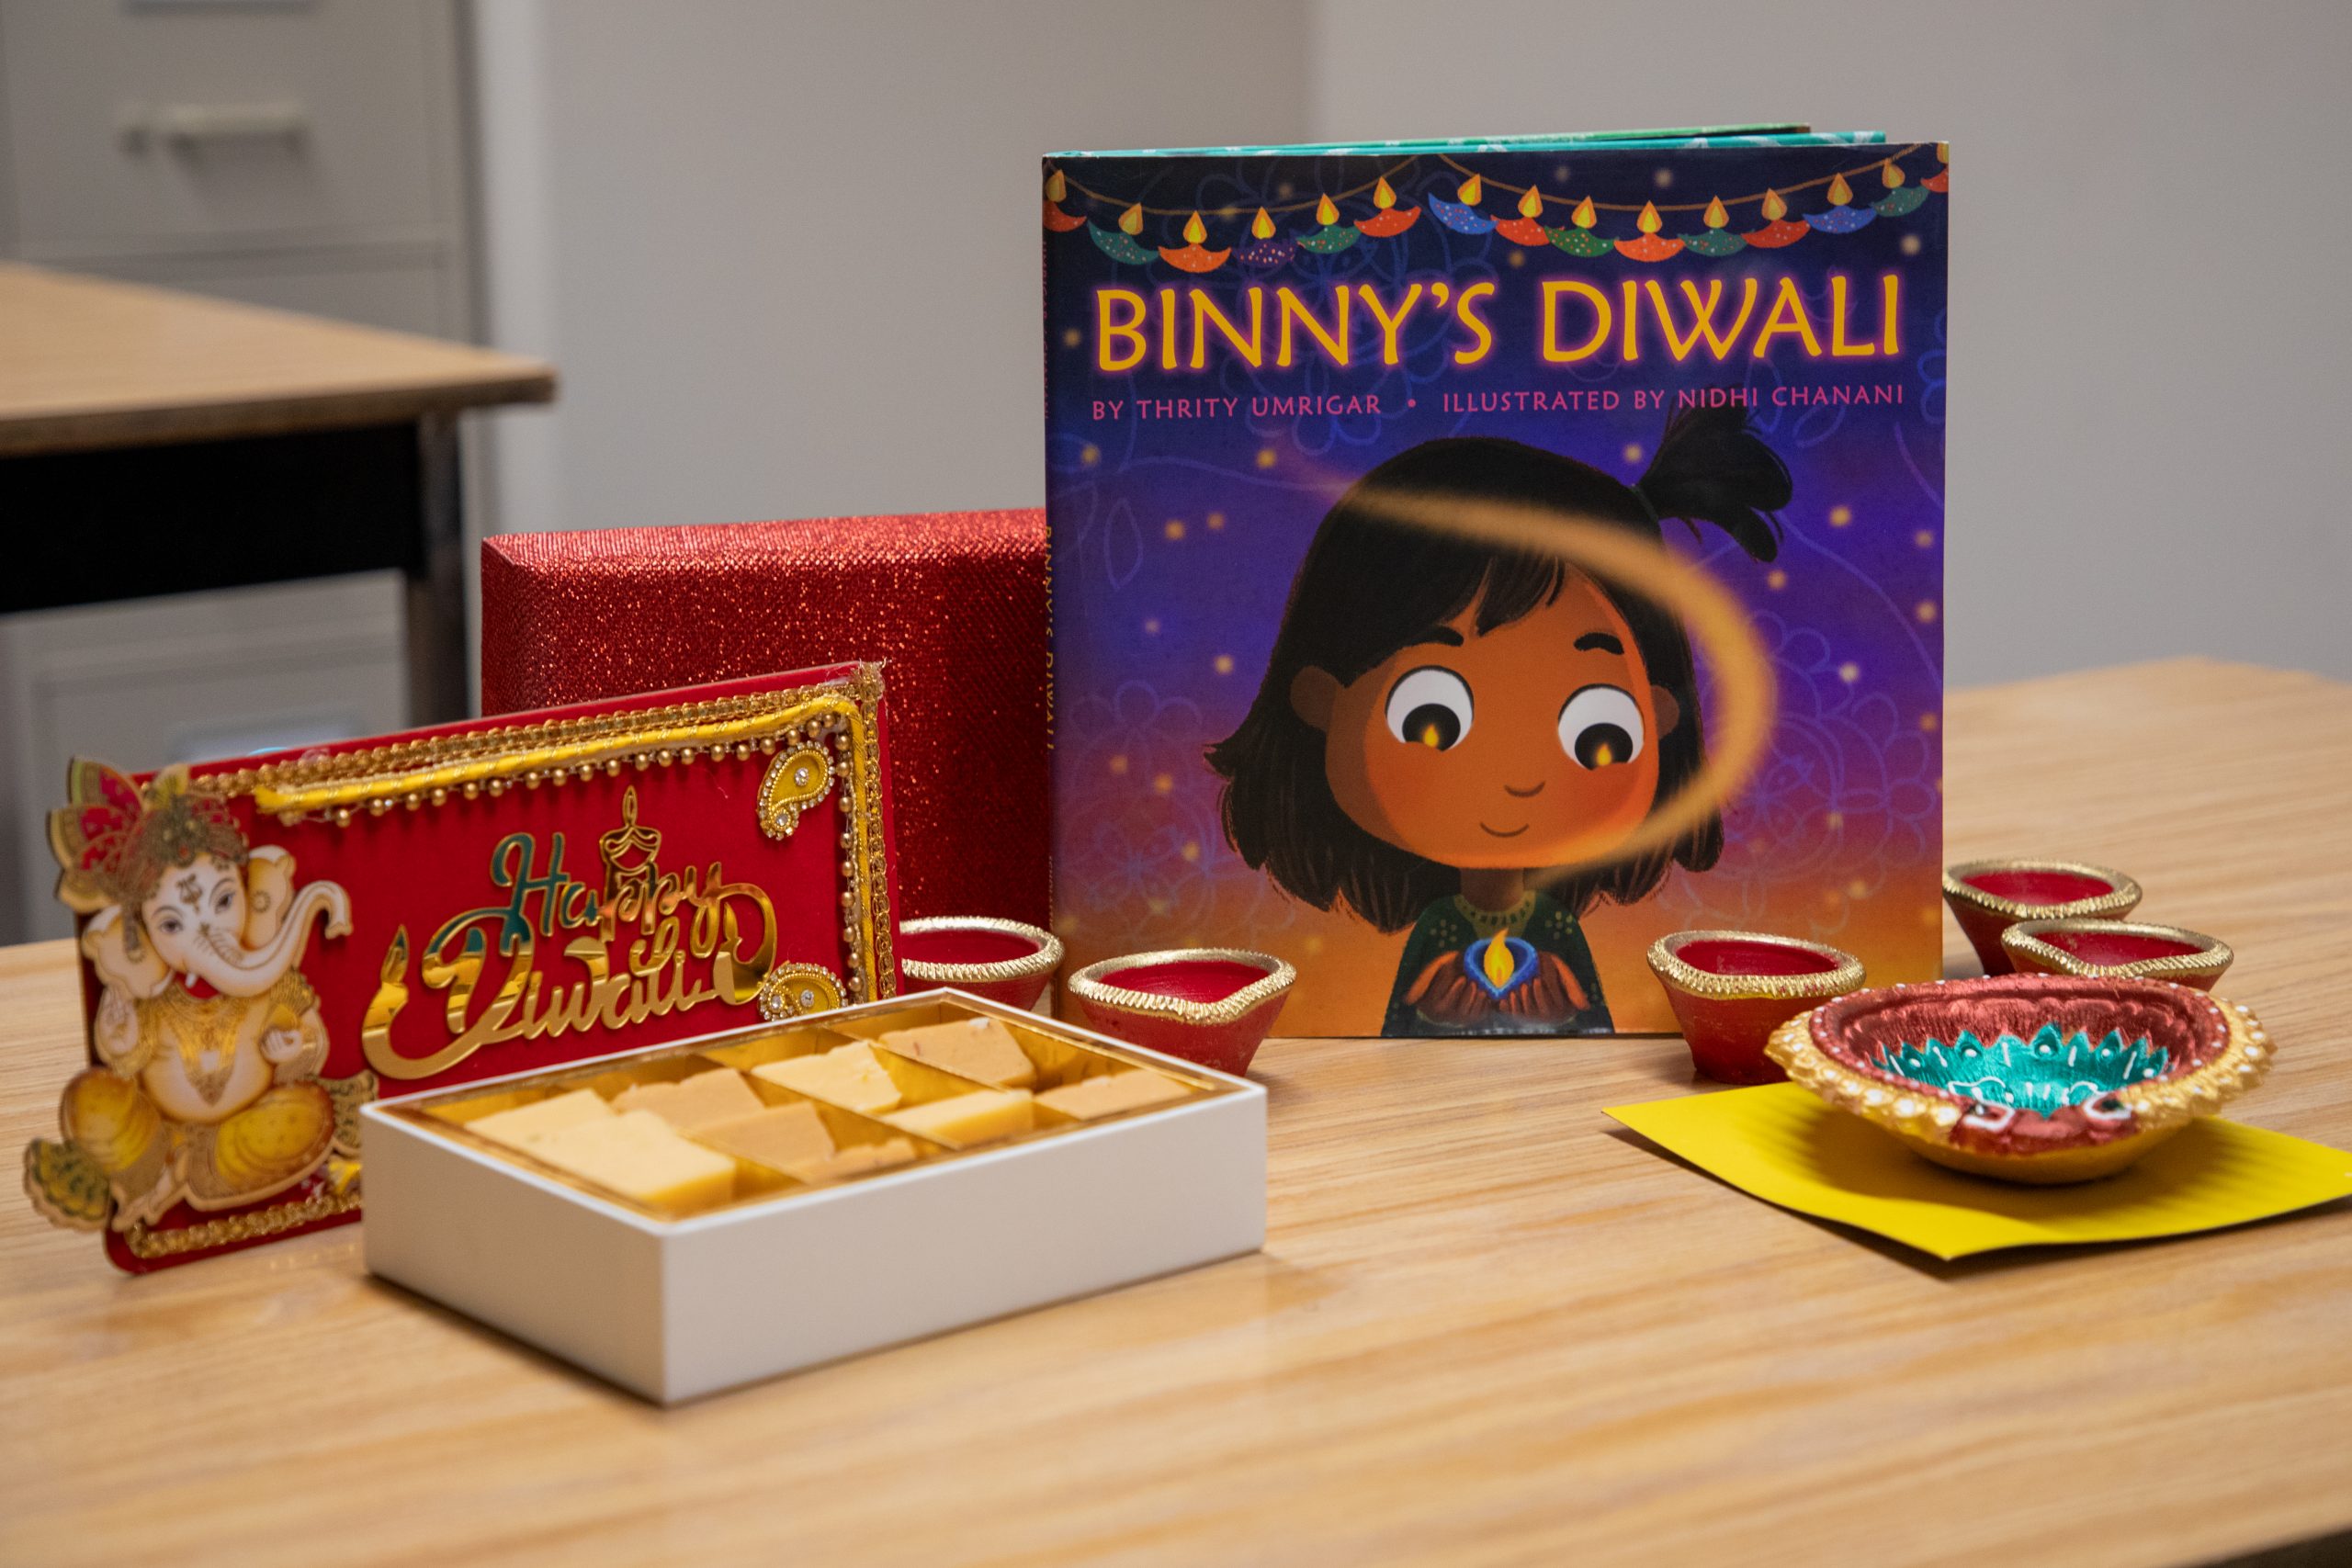 The book, "Binny's Diwali" by Thrity Umrigar, on a table surrounded by diyas, sweets and a sign that reads "Happy Diwali." 